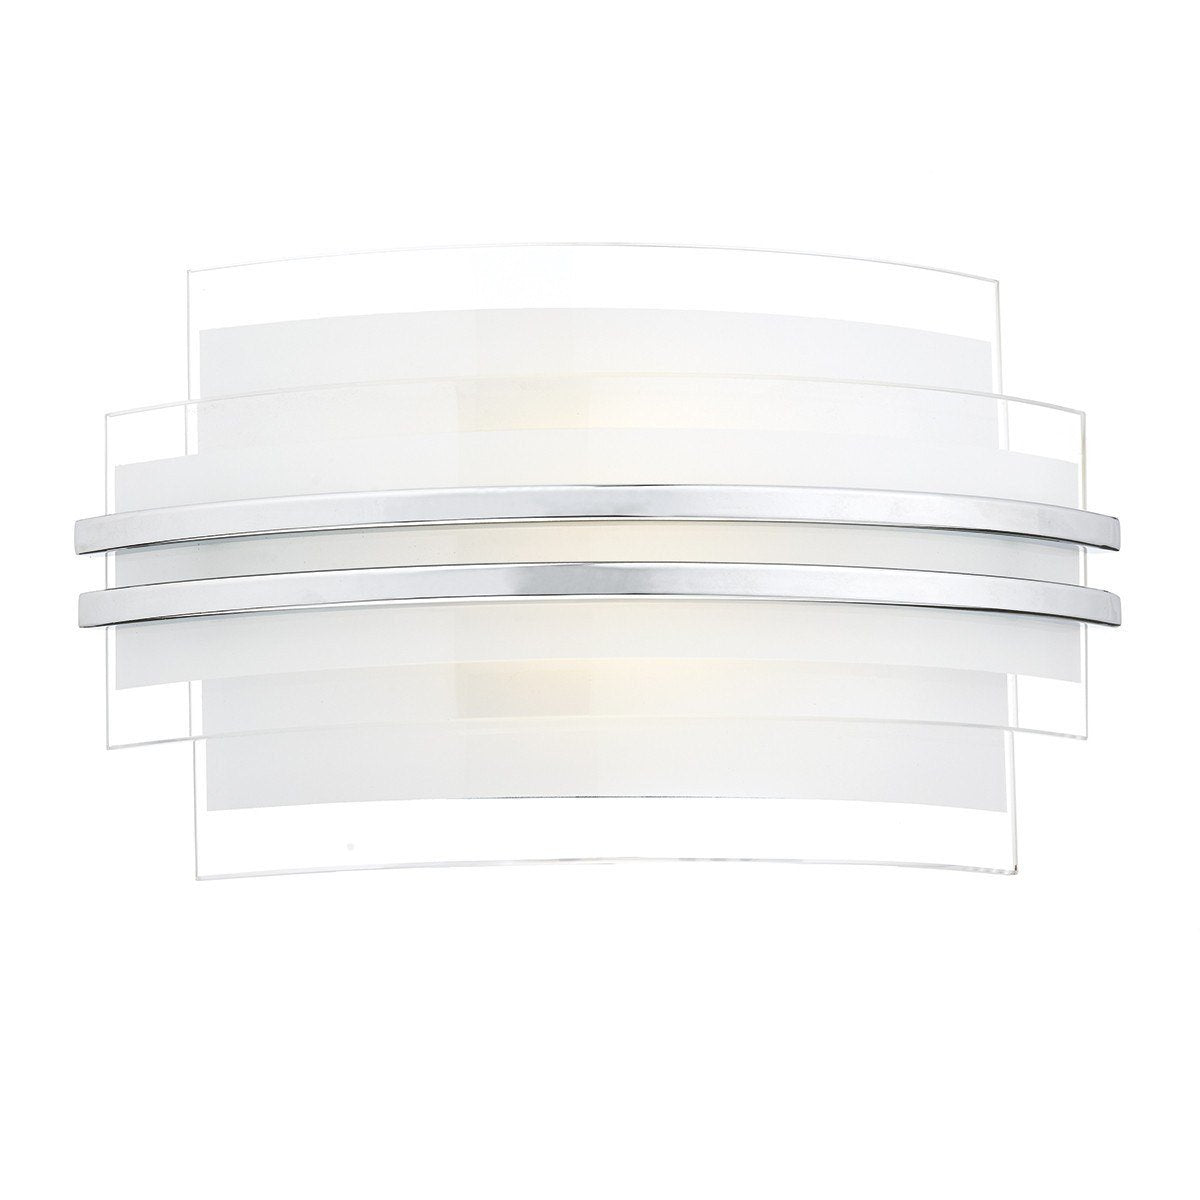 Sector White Small Double Trim Led Wall Bracket - London Lighting - 1